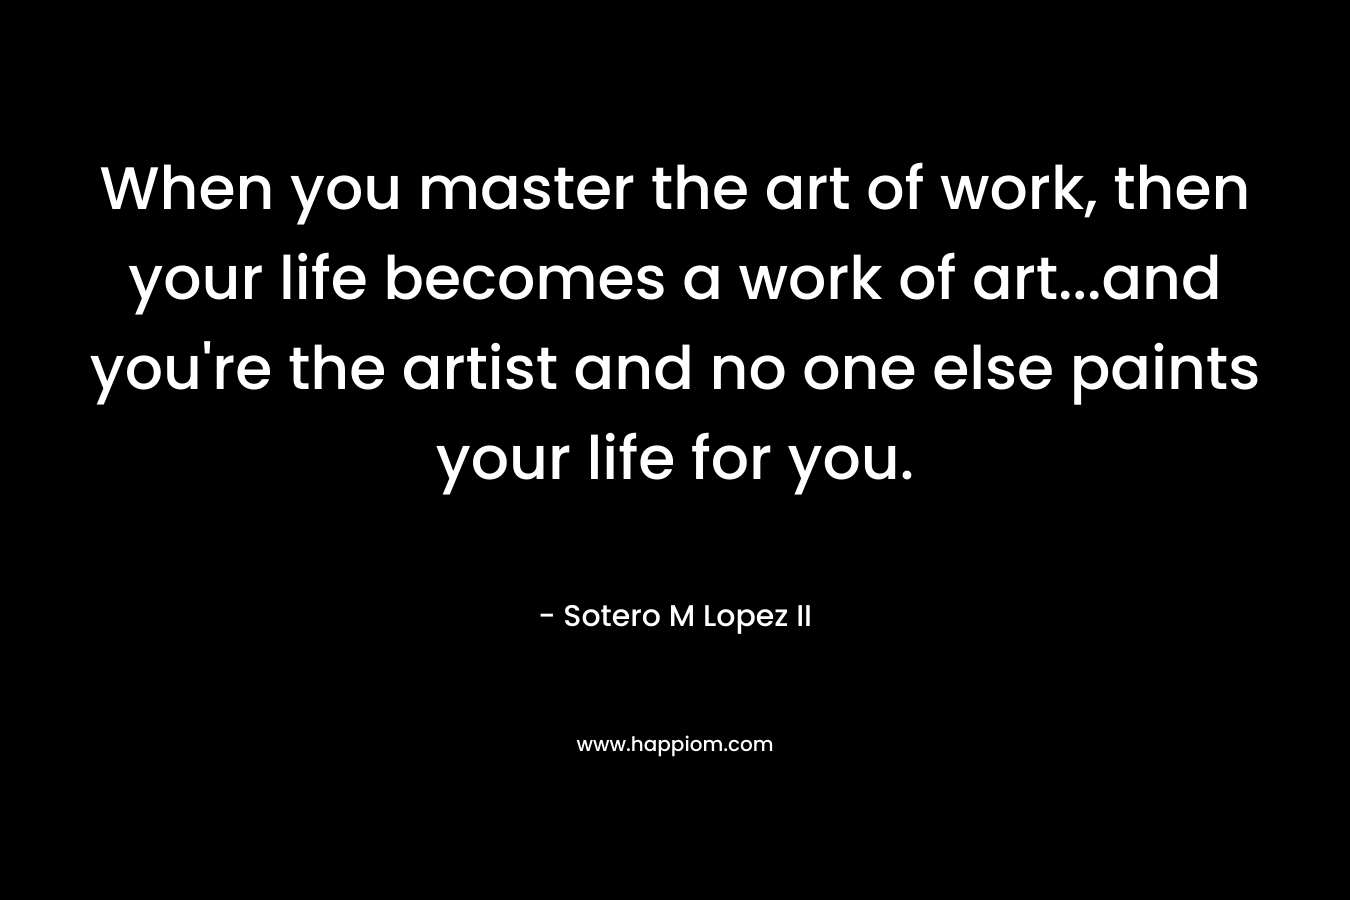 When you master the art of work, then your life becomes a work of art...and you're the artist and no one else paints your life for you.